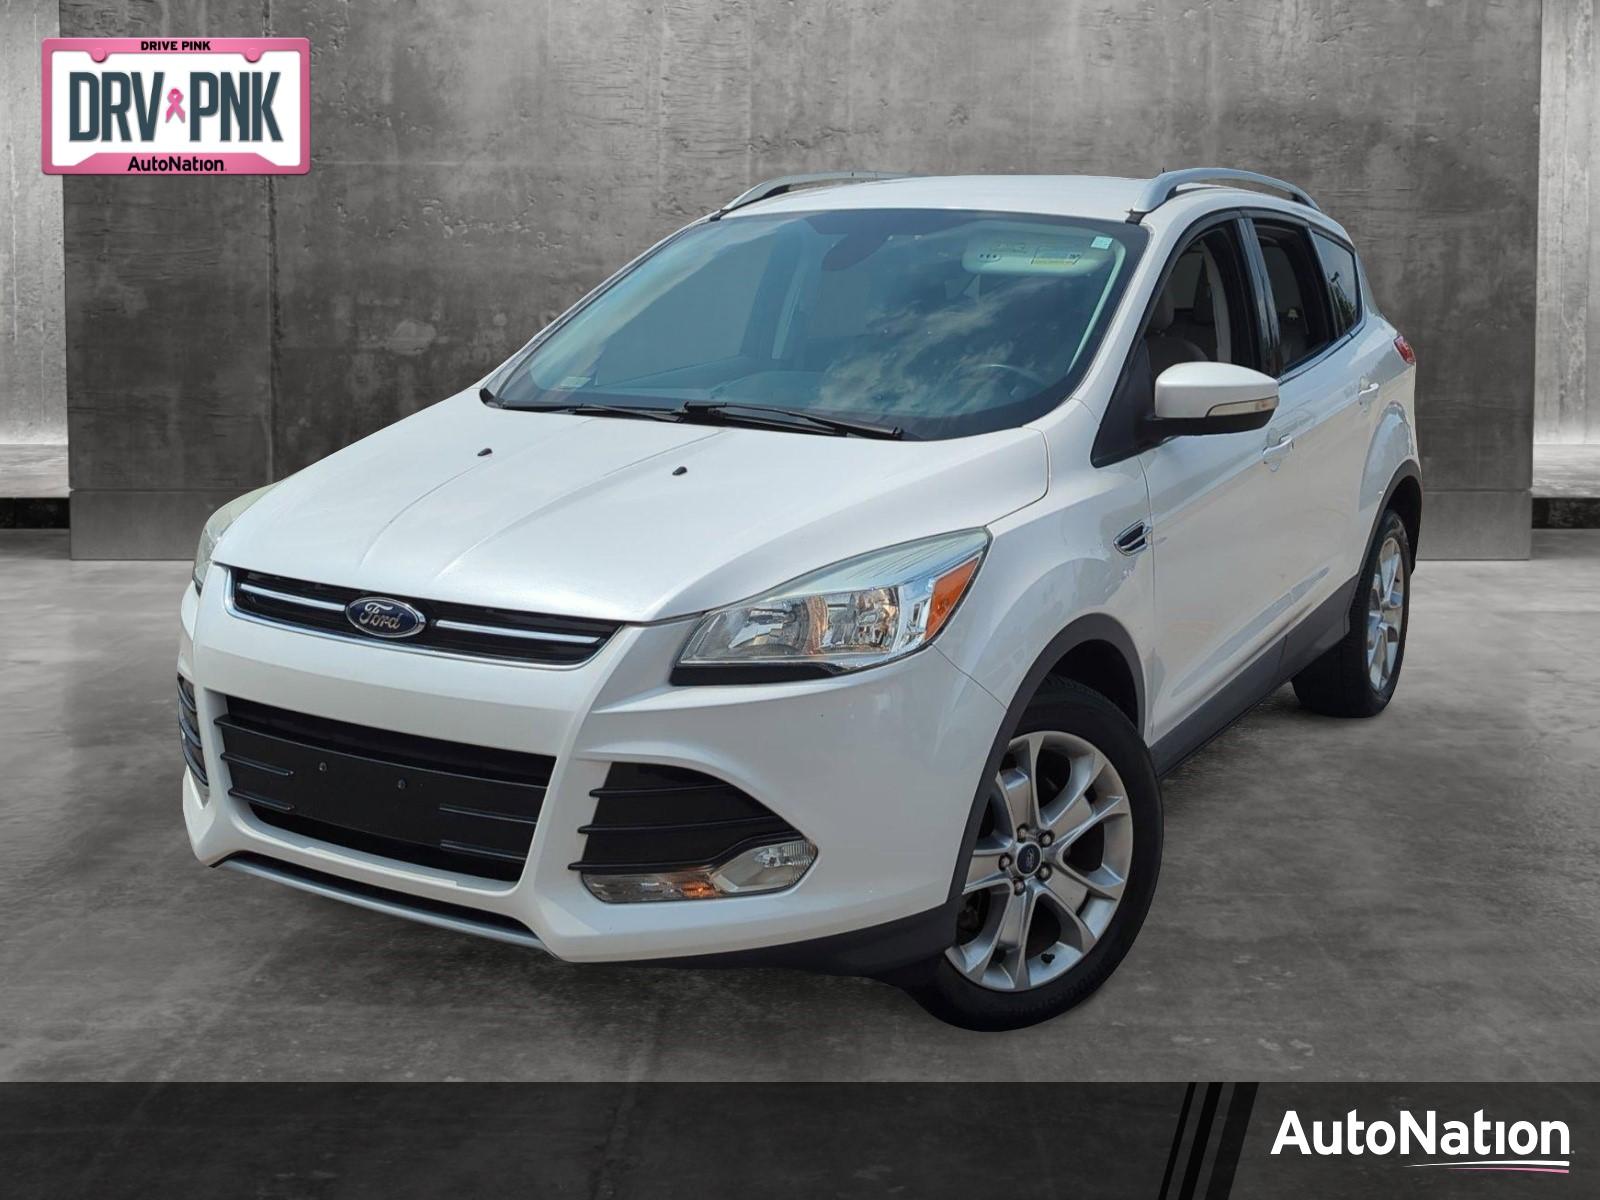 2014 Ford Escape Vehicle Photo in Clearwater, FL 33765